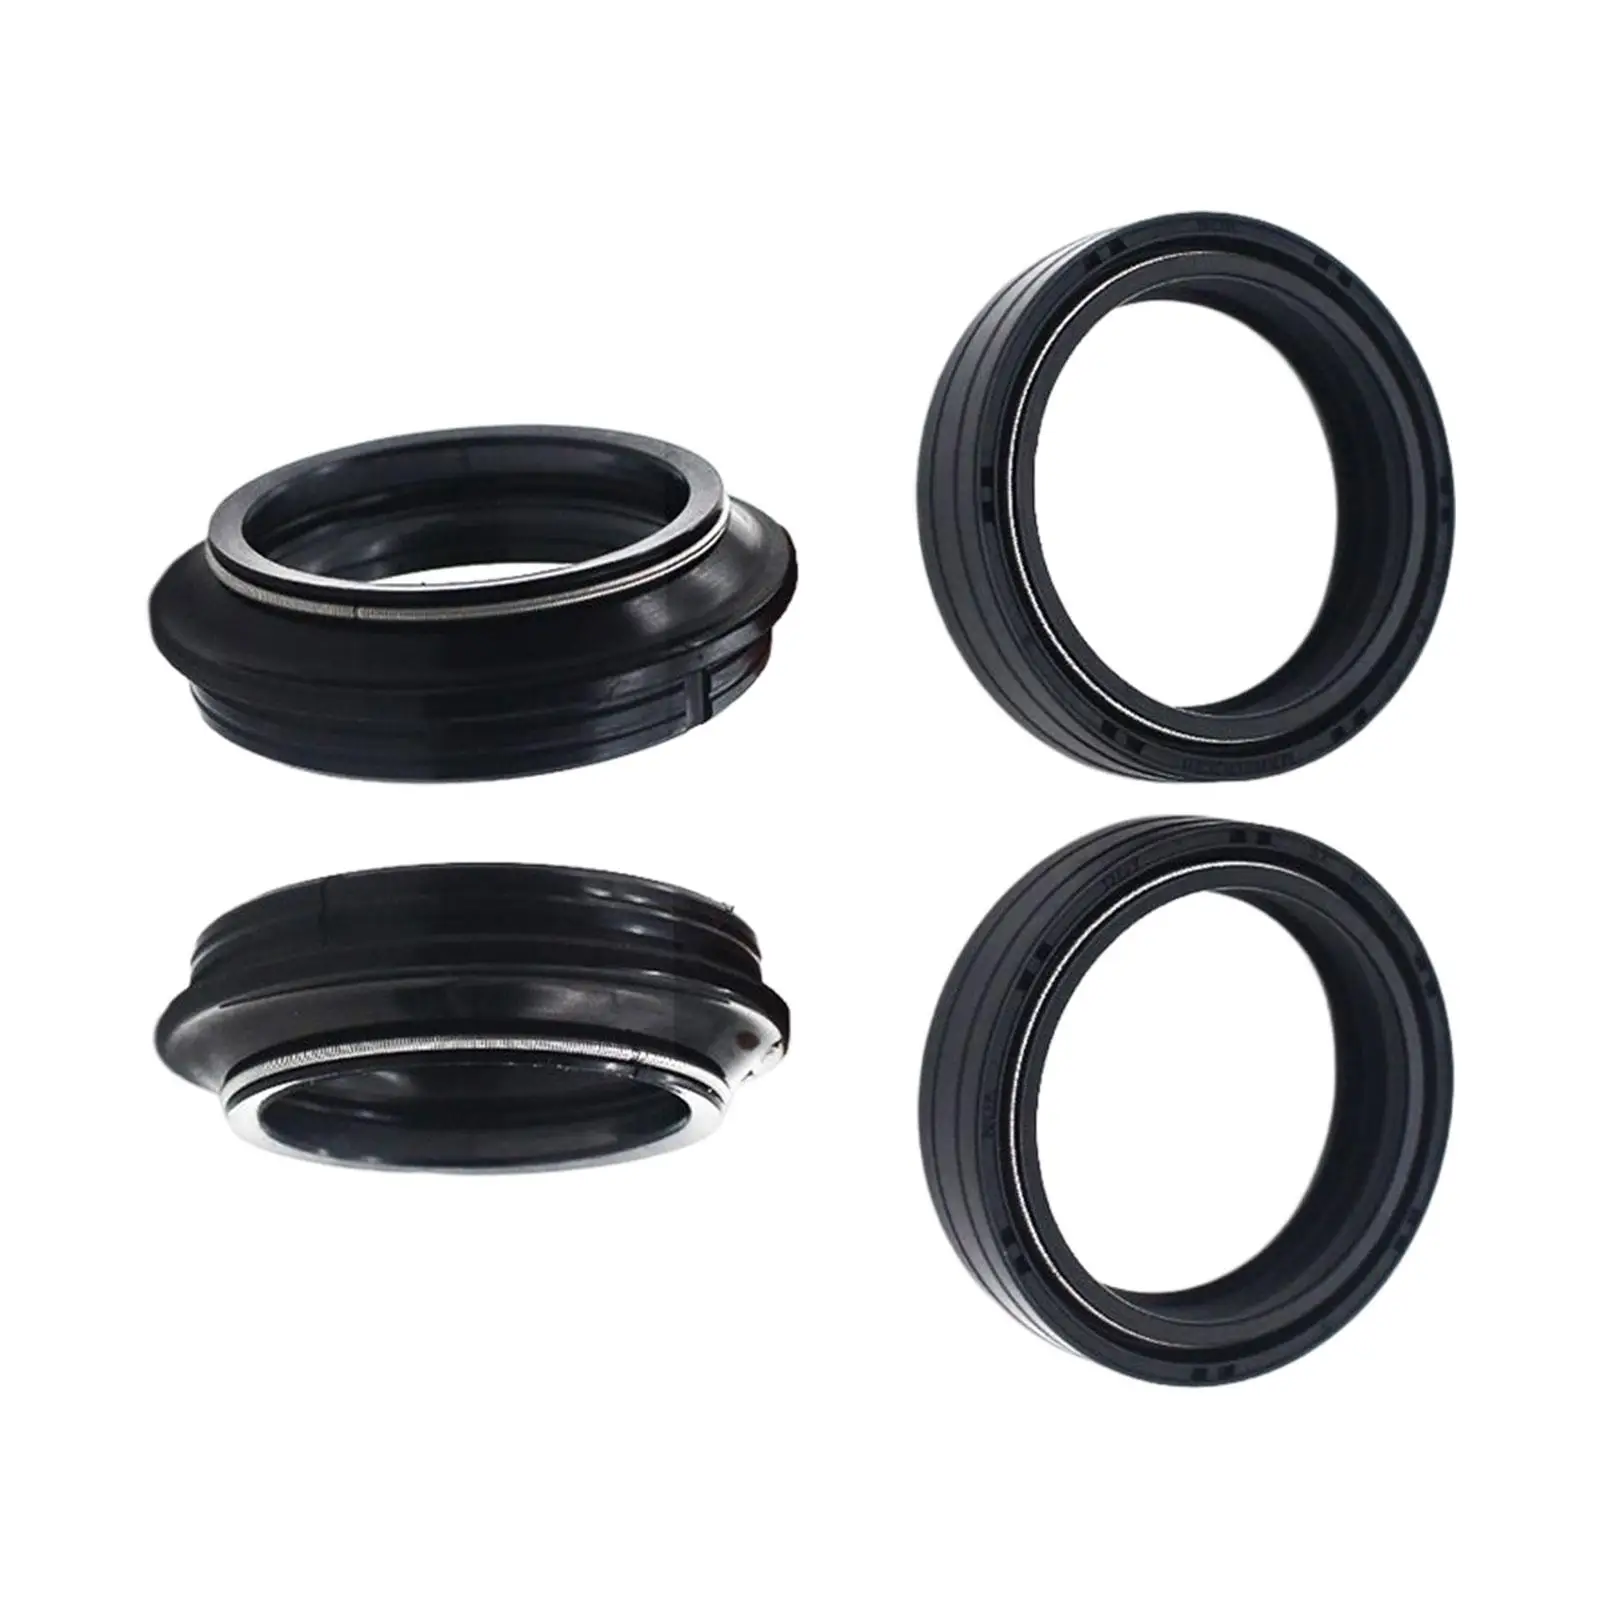 Fork Seal and Dust Seal Kit Accessories for BMW R1200GS Replace Durable